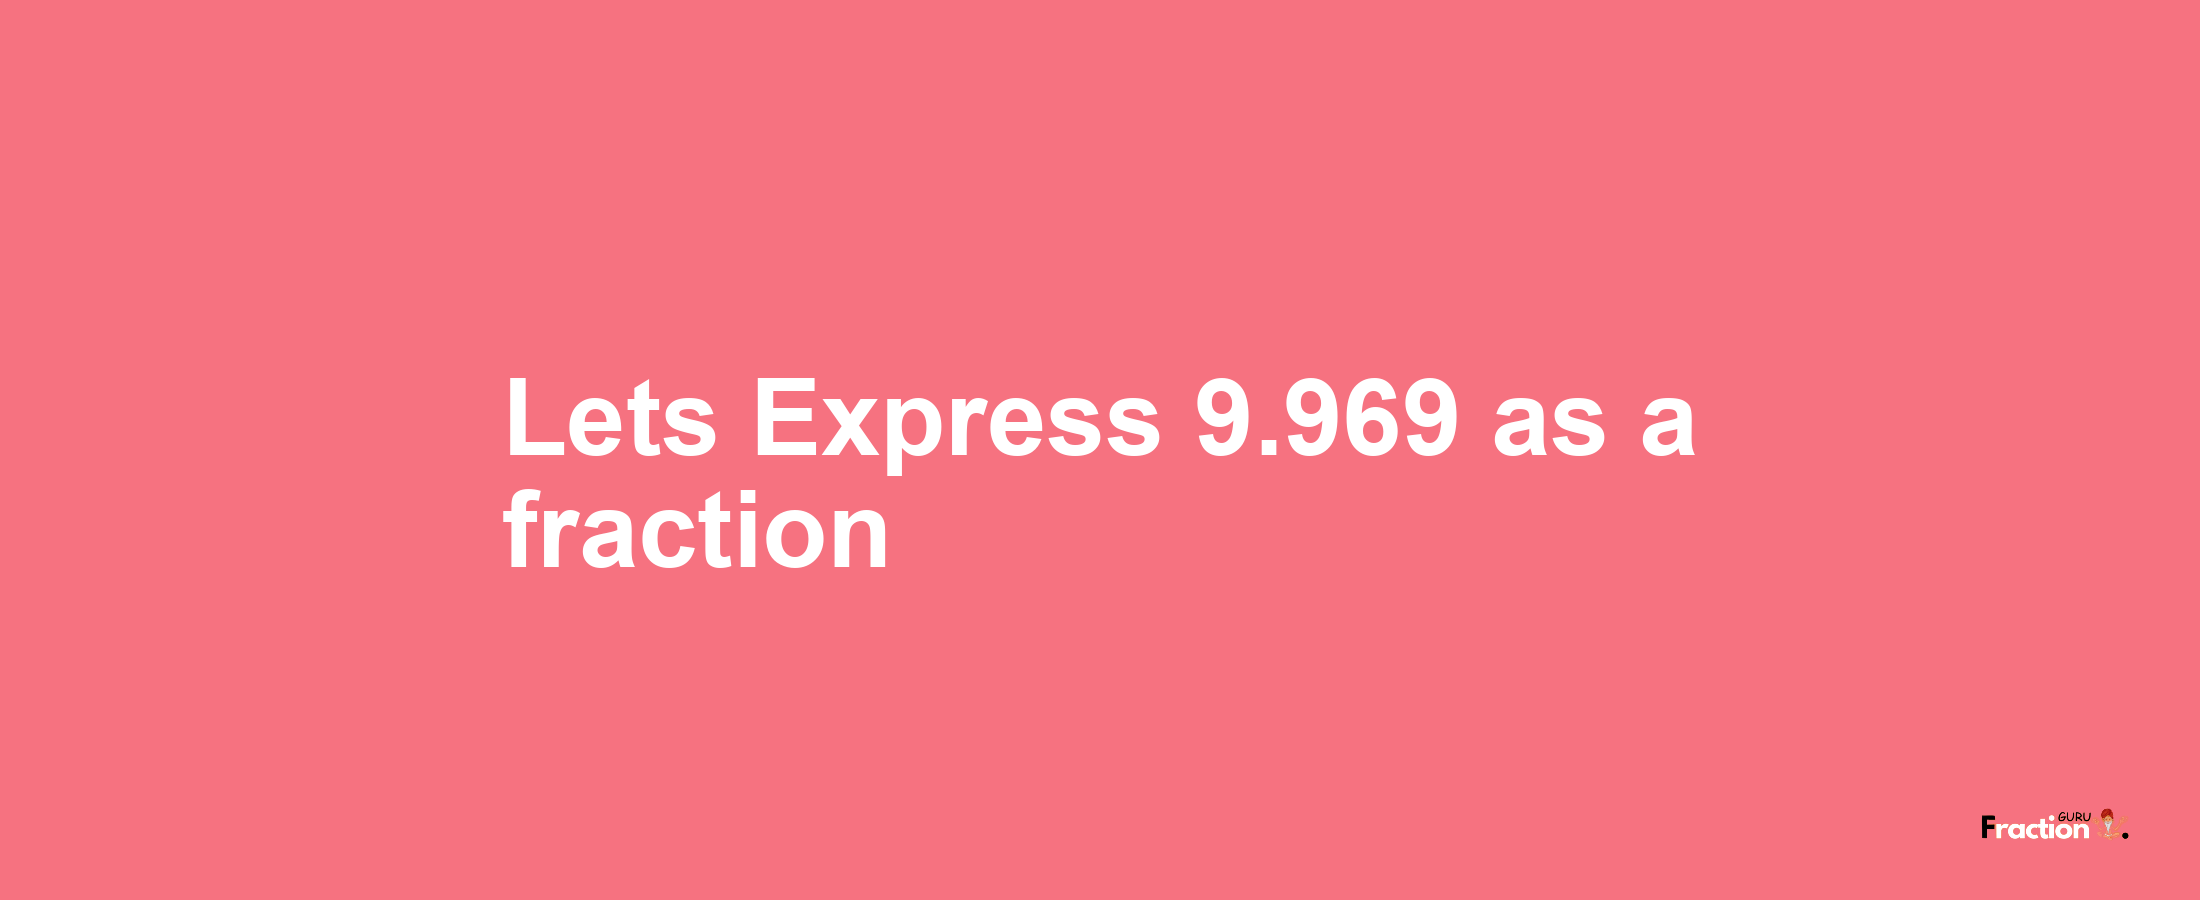 Lets Express 9.969 as afraction